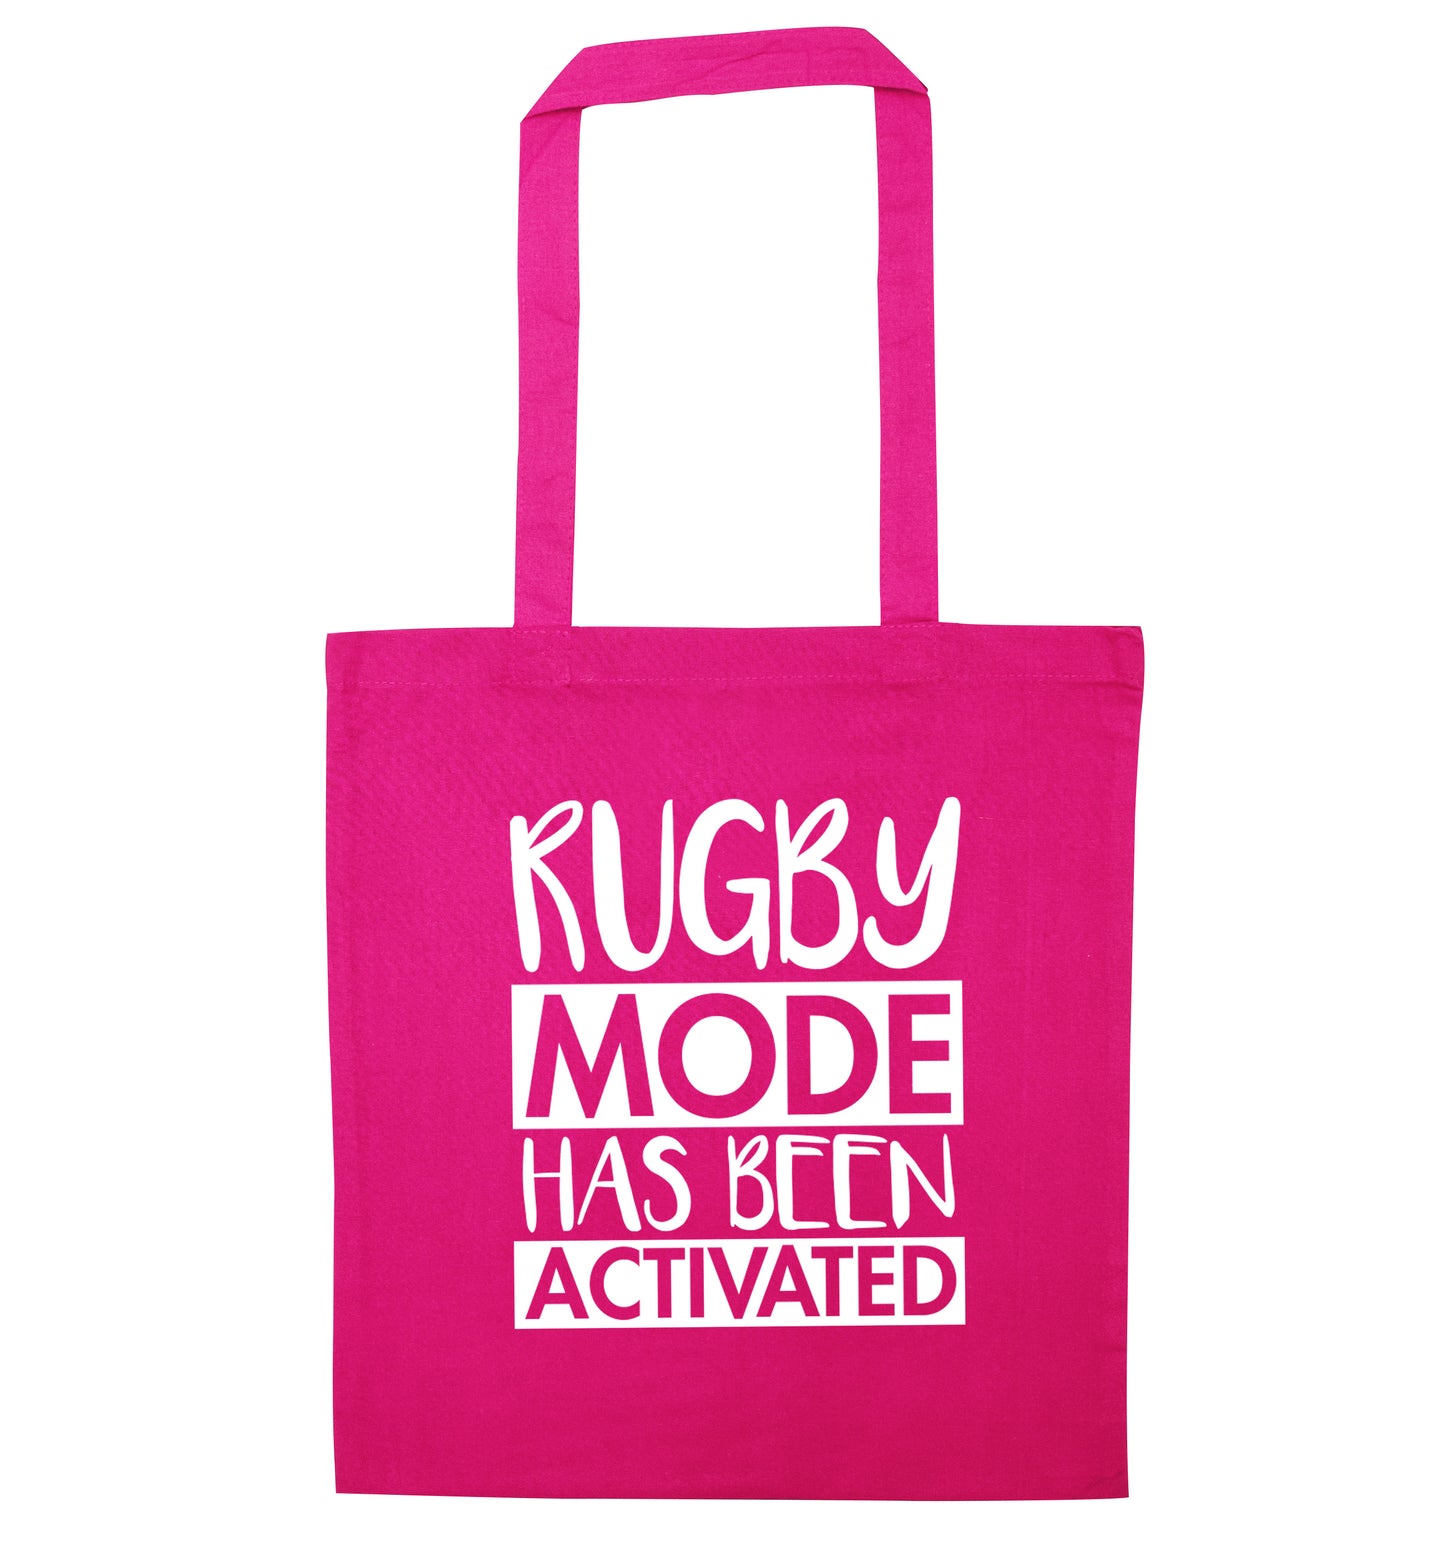 Rugby mode activated pink tote bag